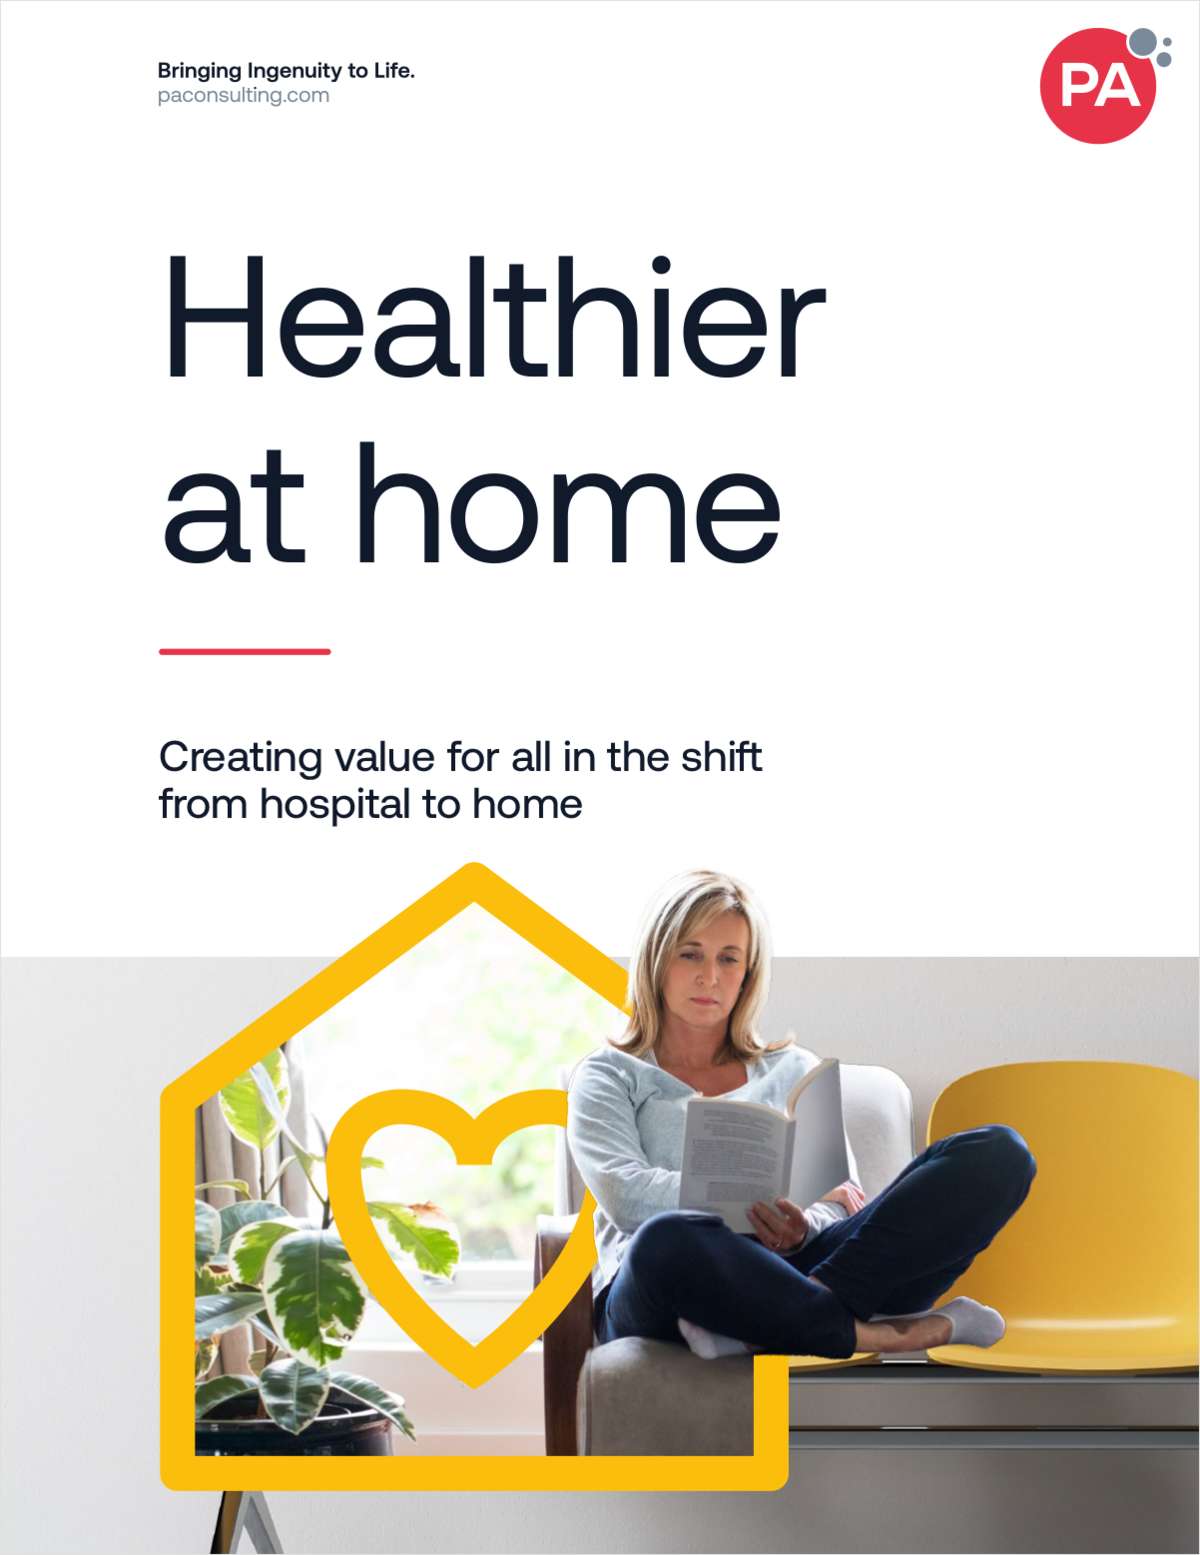 Healthier at home: The next frontier of healthcare